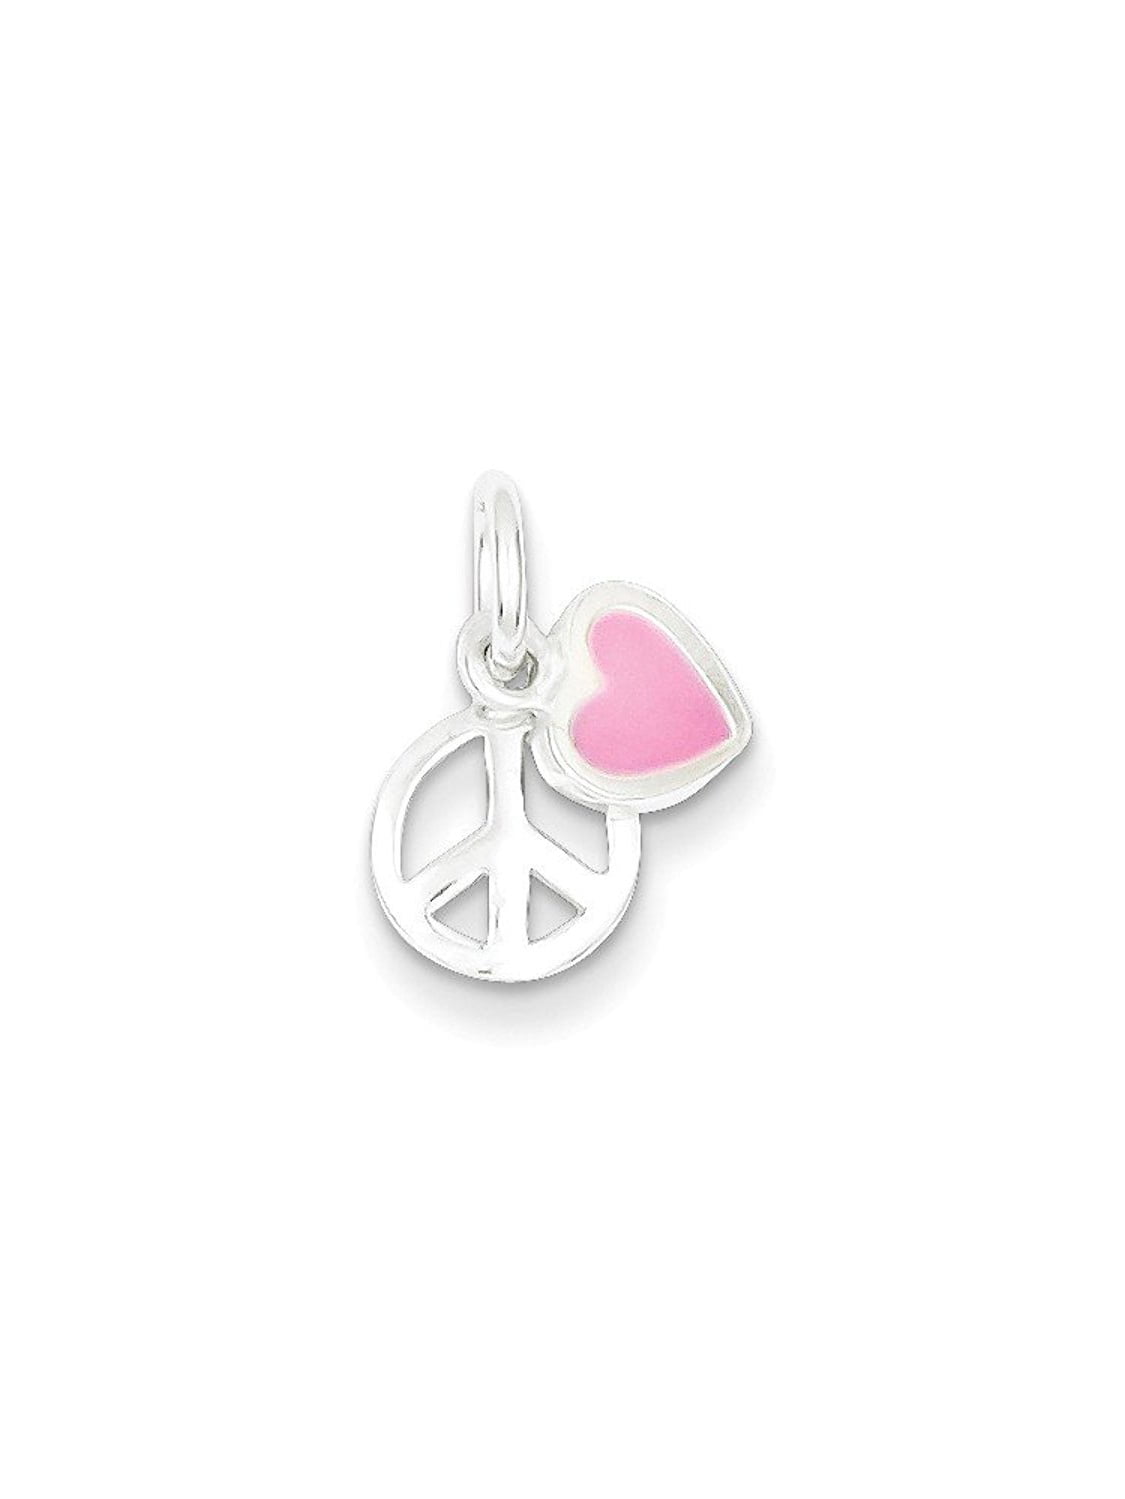 11mm Height x 8mm Width Solid 925 Sterling Silver Peace Sign Sign with Pink Enamel Love Heart Pendant 